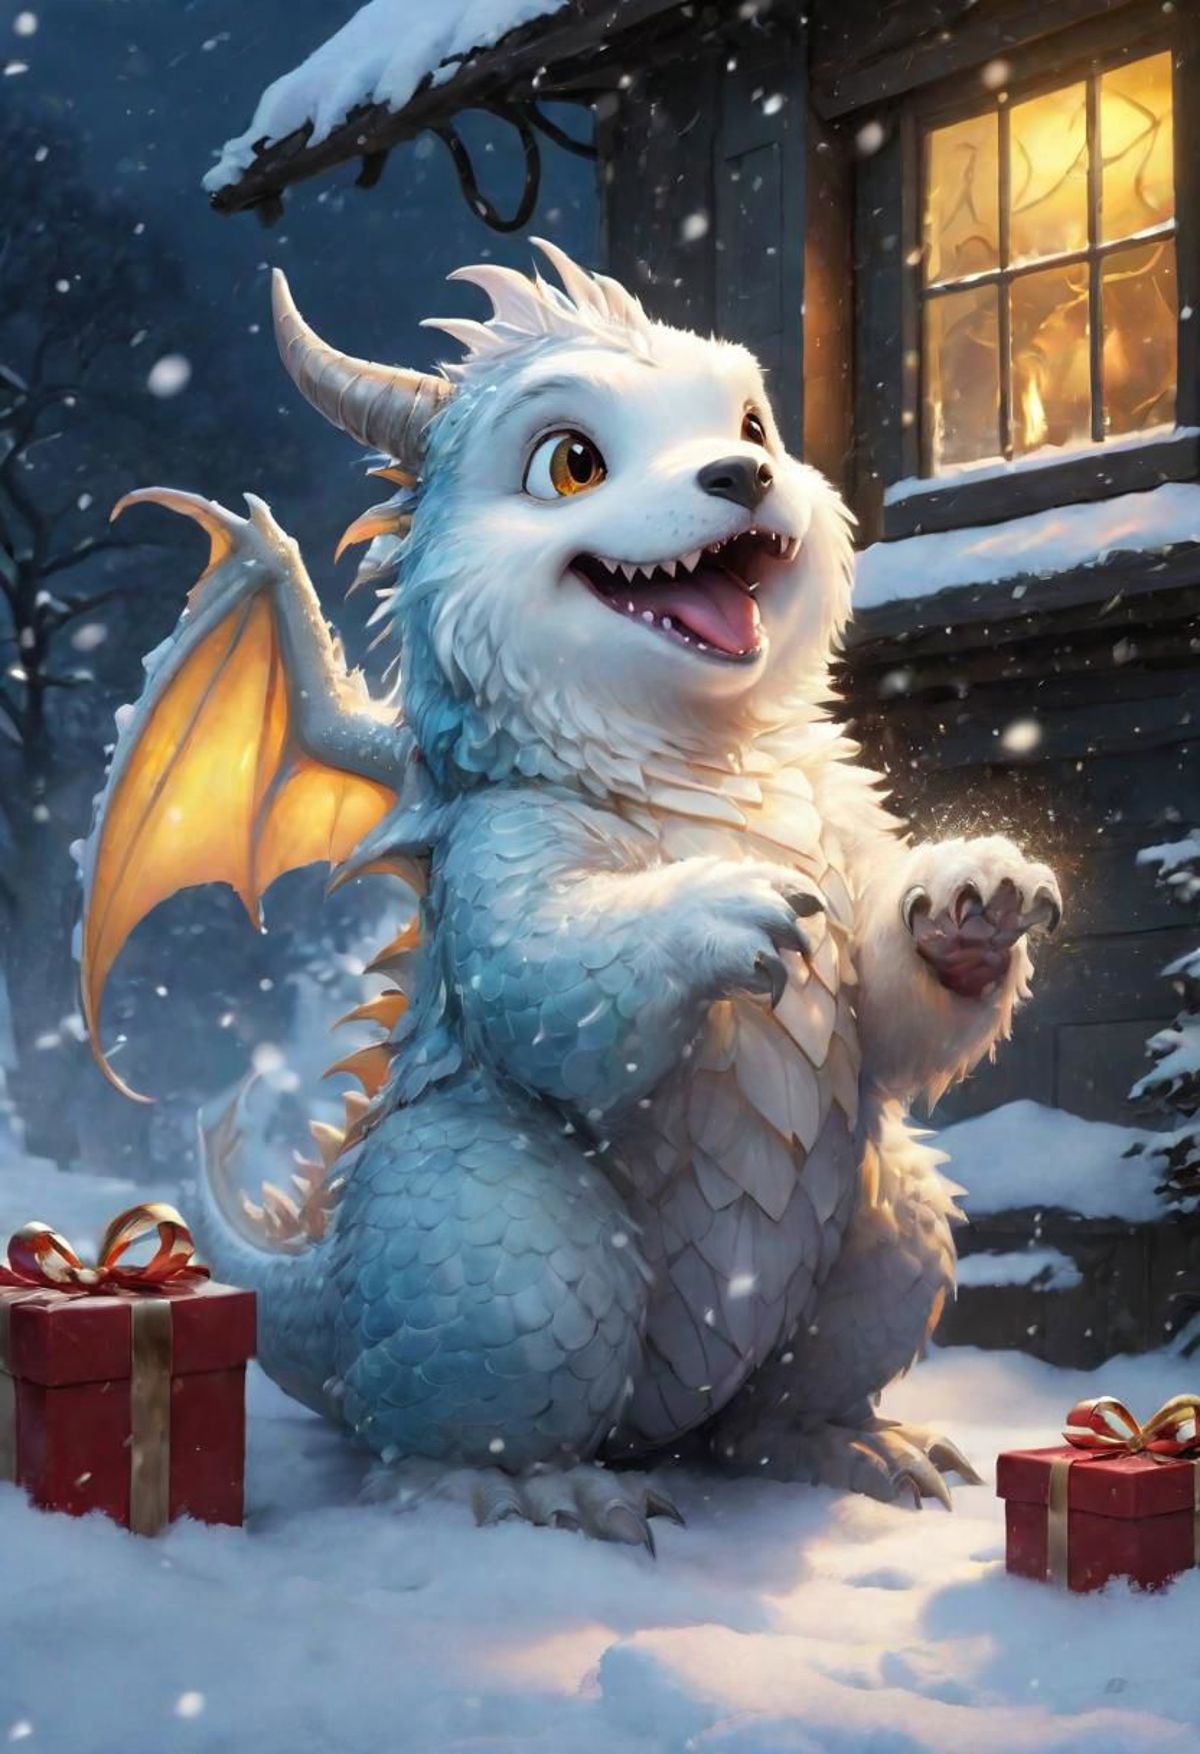 White Dragon with Blue Wings and Tail, Smiling and Standing in Snow with Presents